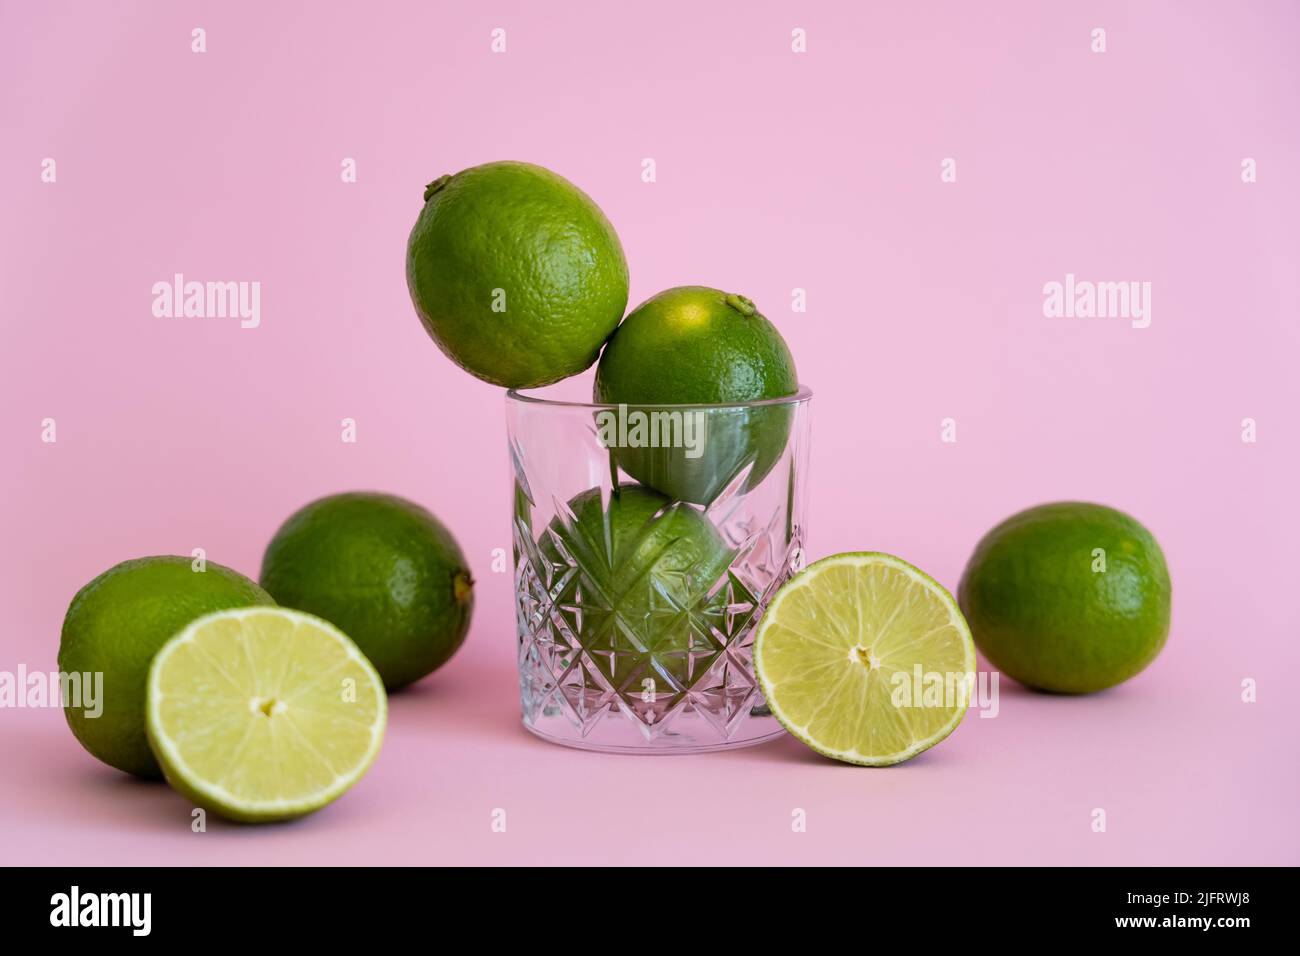 green fresh citrus fruit in faceted glass near halves of limes on pink background Stock Photo